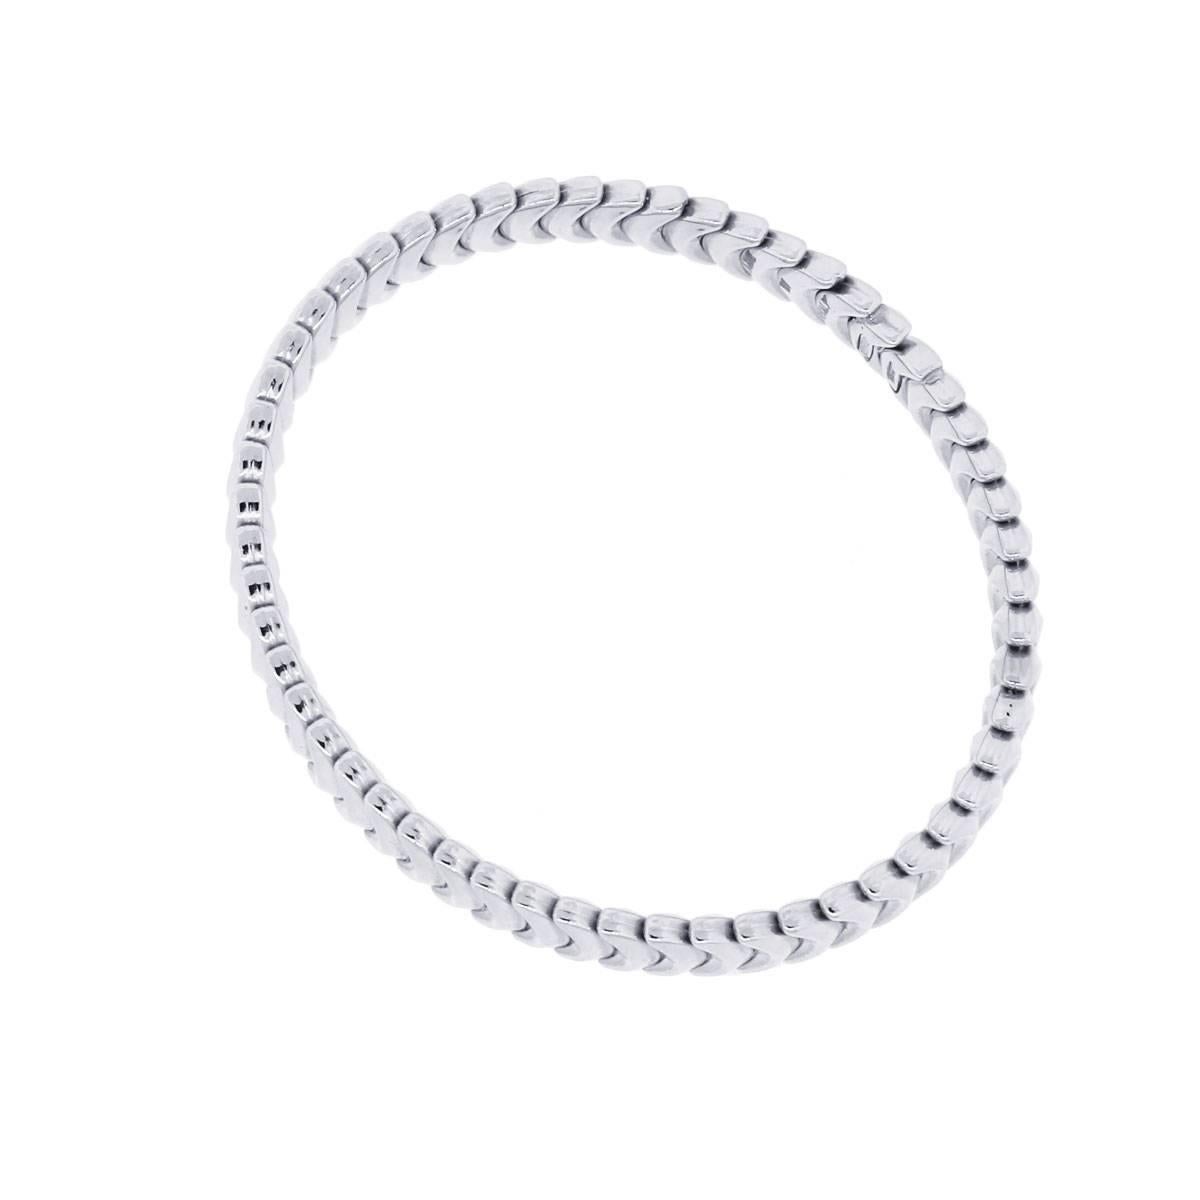 Designer: Chimento
Material: 18k White Gold
Fastening: Open clasp
Measurements: Will fit a 6.25″ wrist
Item Weight: 11.5g (7.4dwt)
Additional Details: This item comes complete with a presentation box!
SKU: G7570

